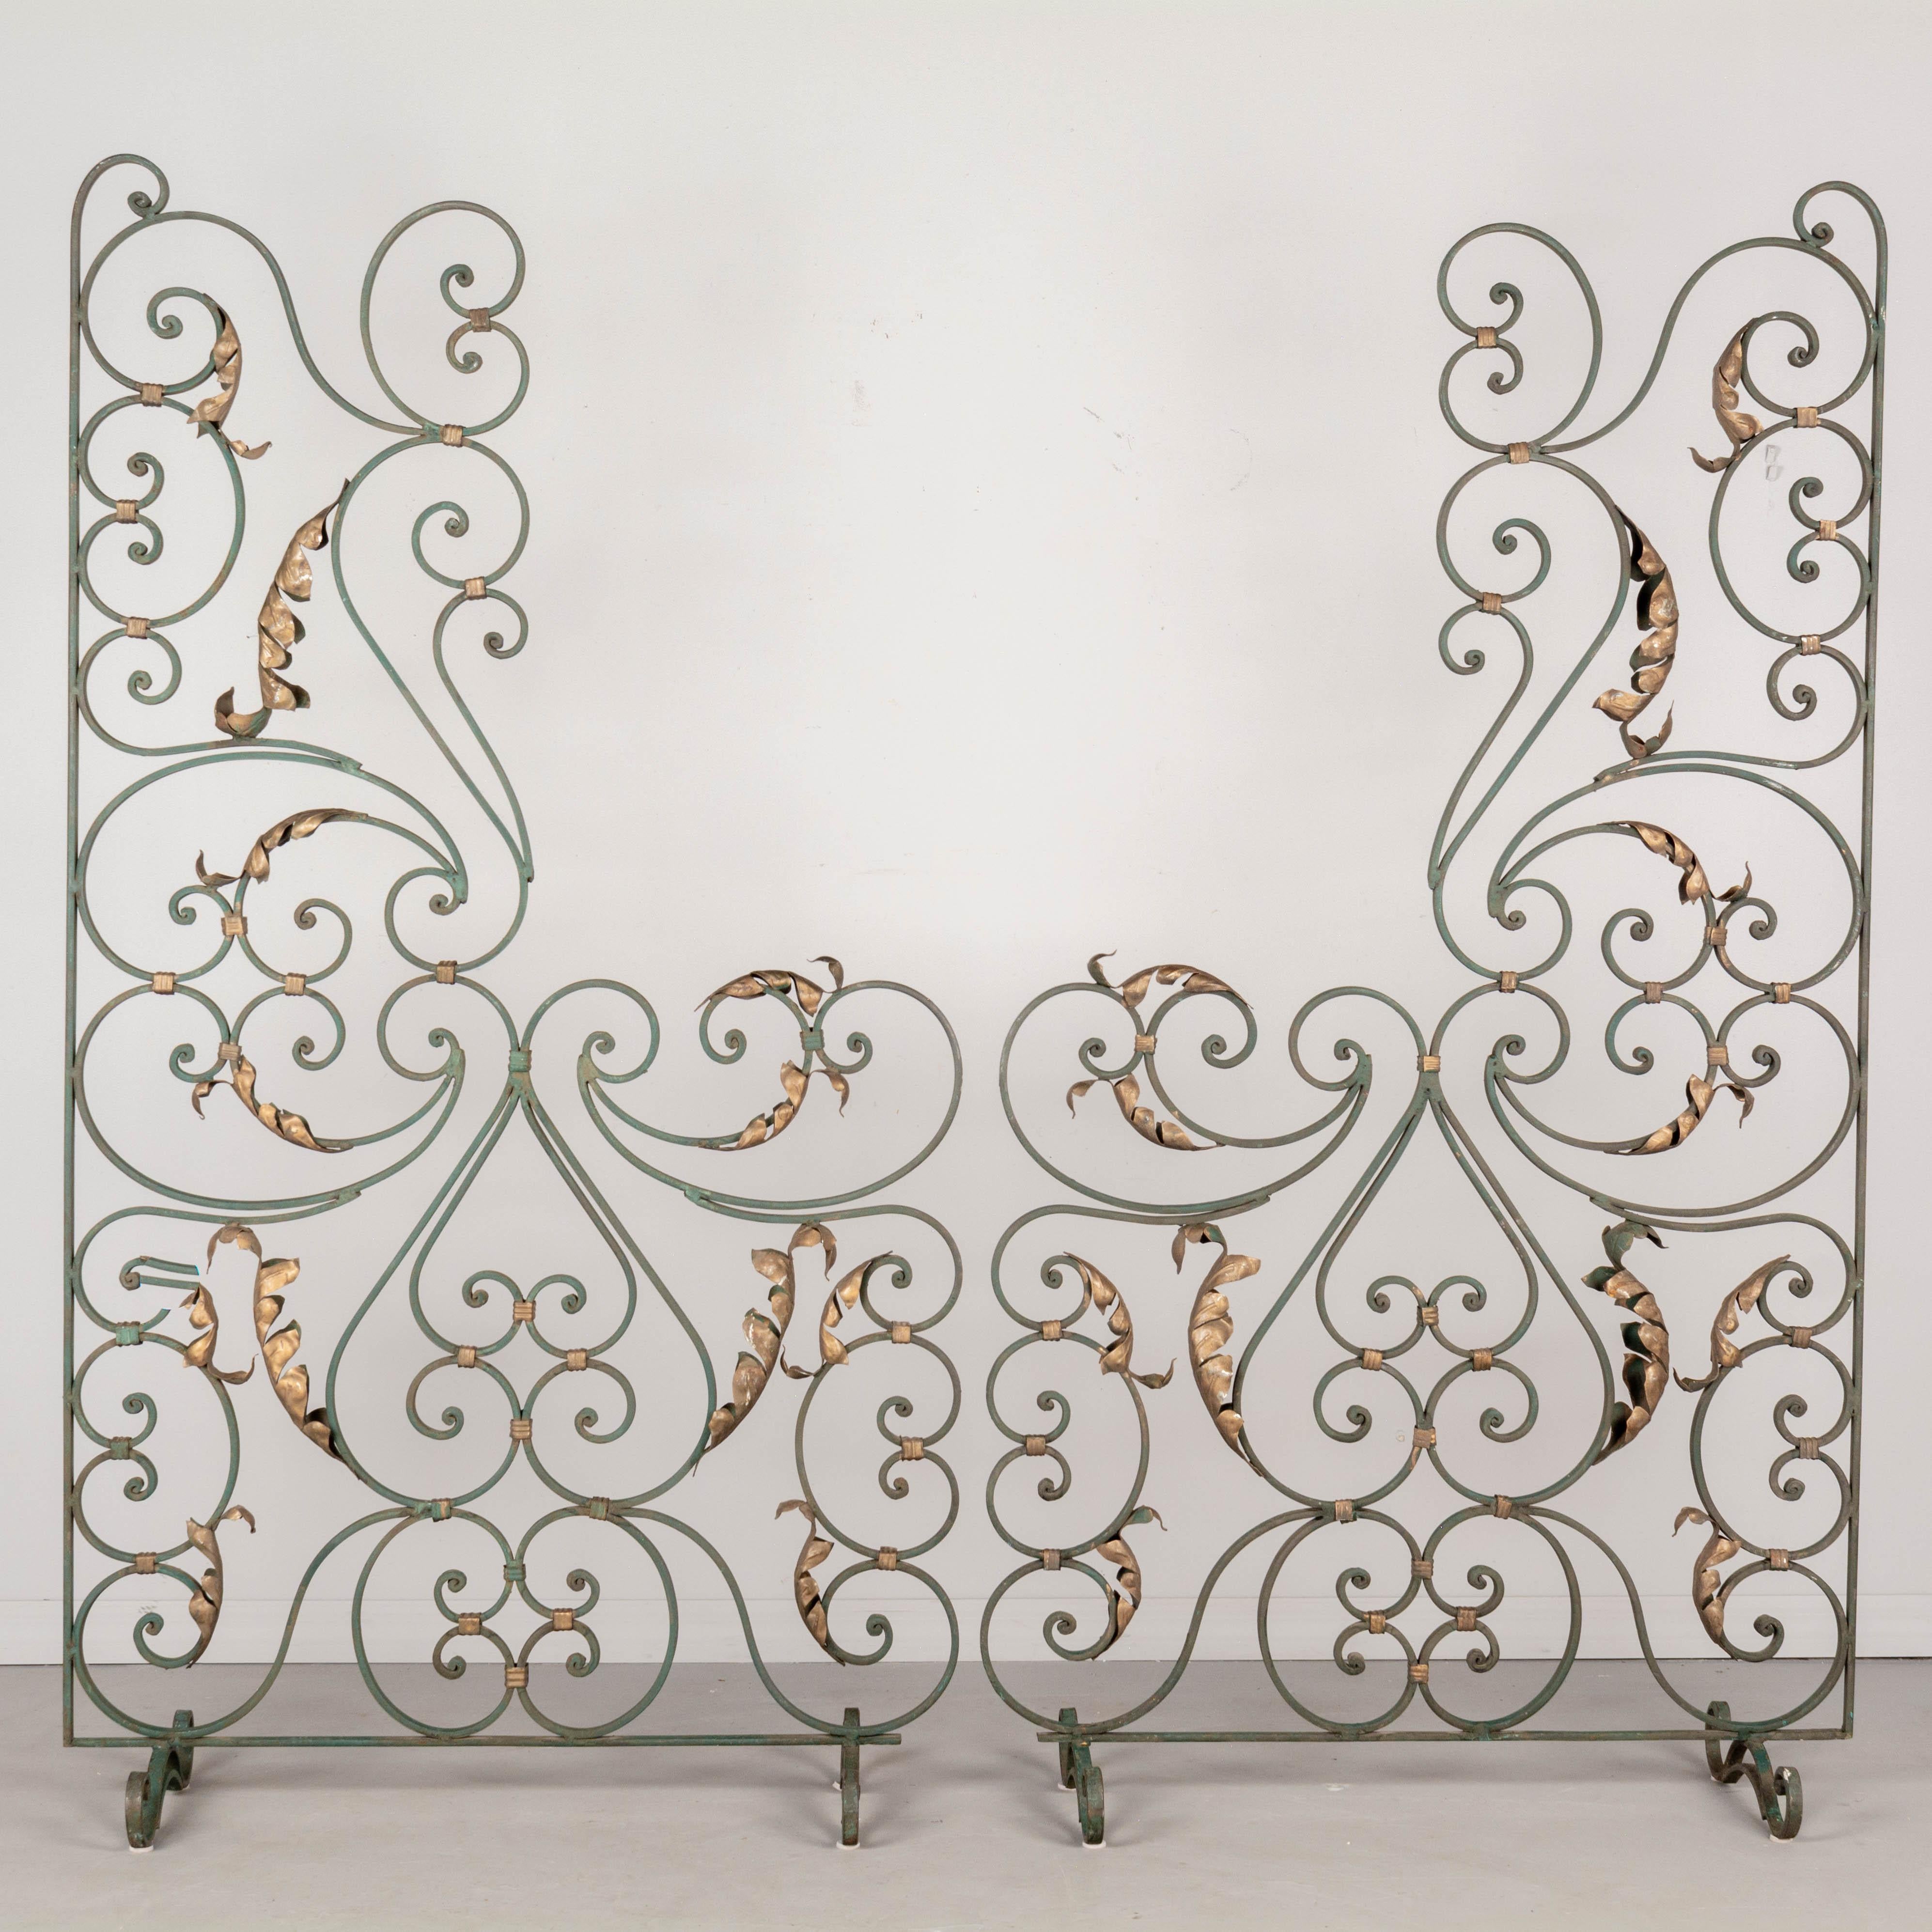 Pair of French Wrought Iron Screens or Room Dividers In Good Condition For Sale In Winter Park, FL